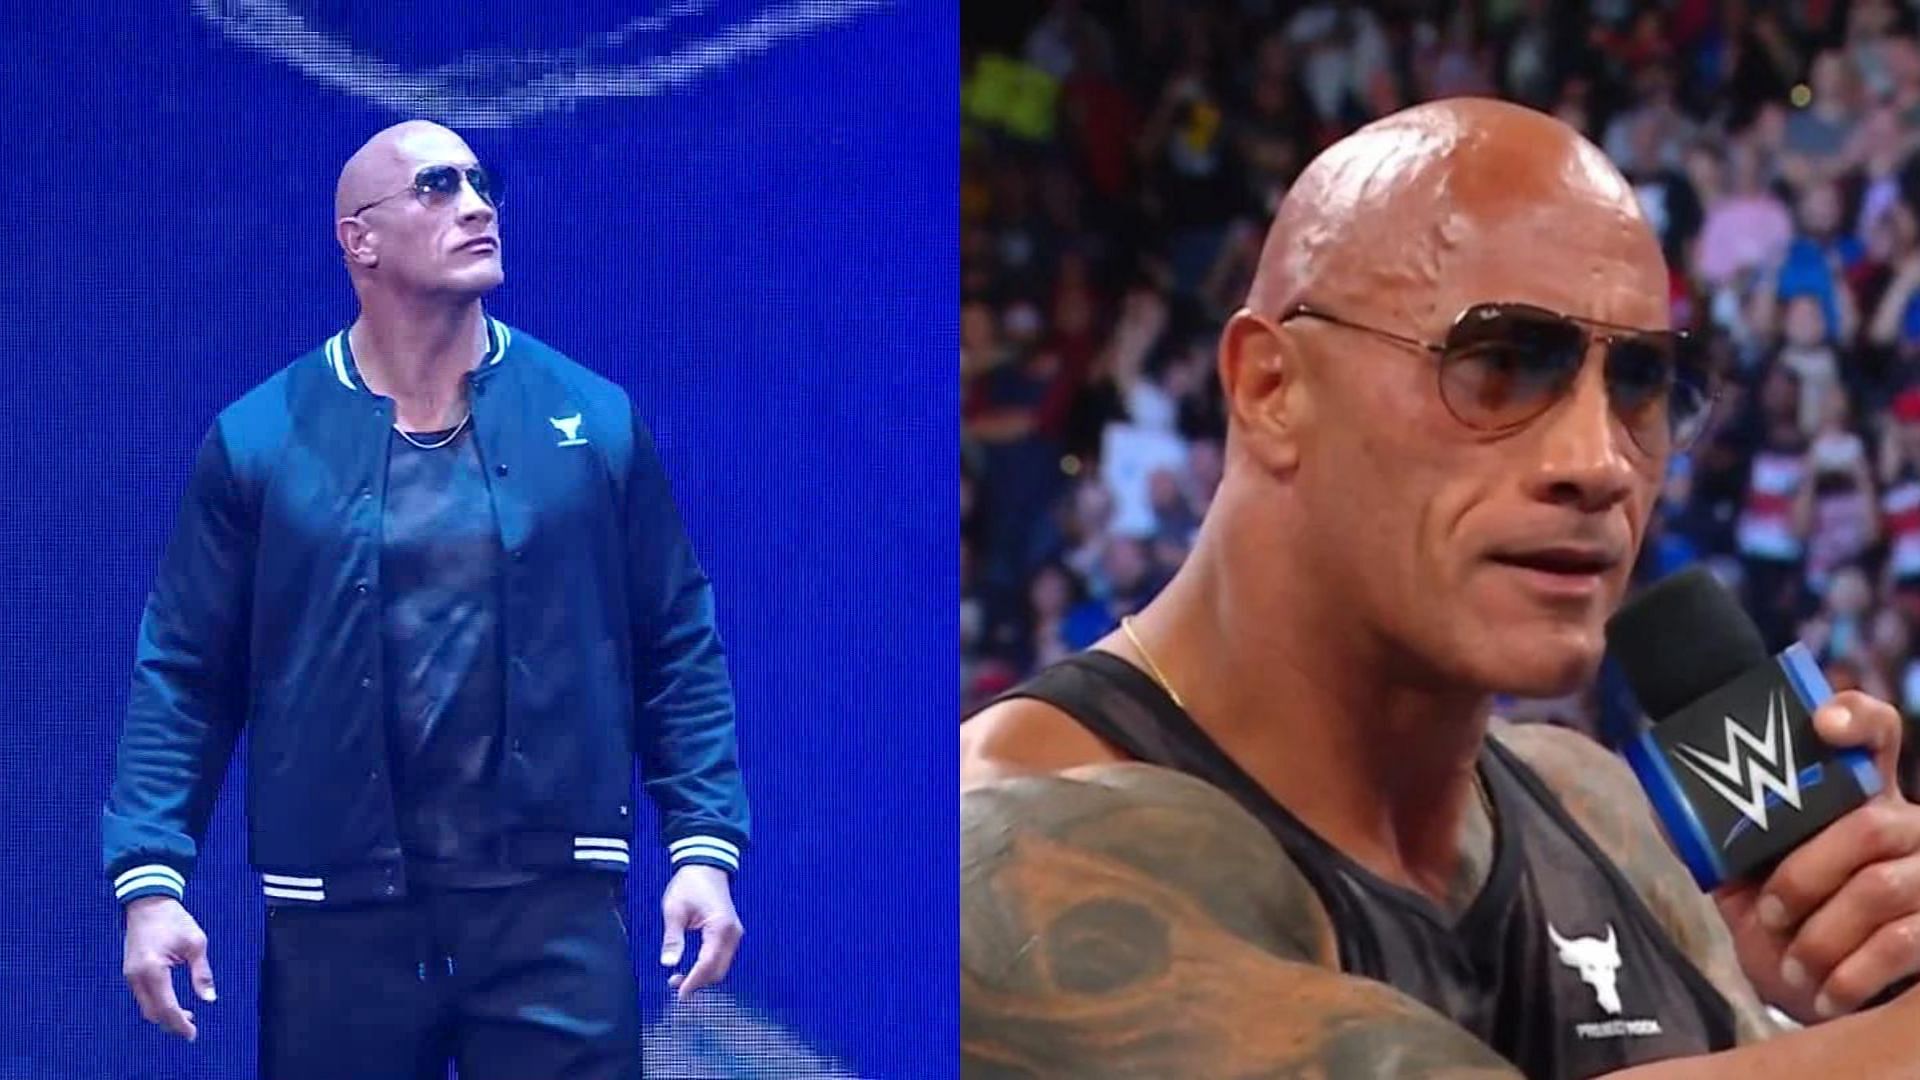 The Rock recently returned to WWE for the first time in years